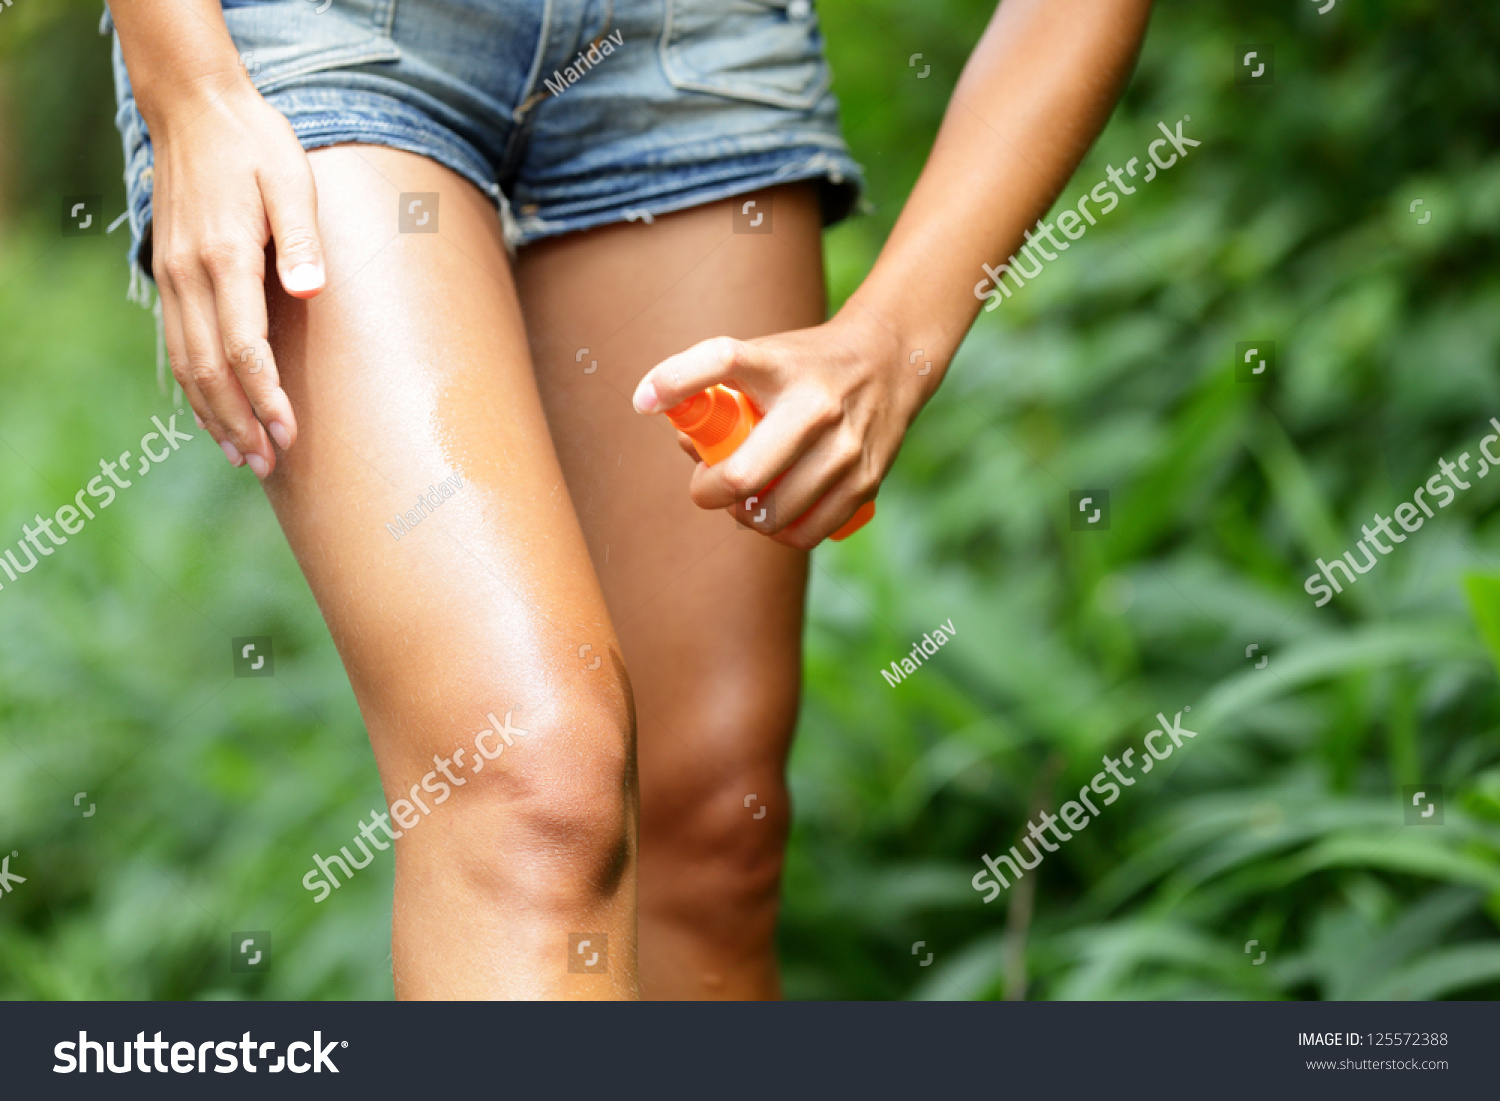 Mosquito repellent. Bug spray anti insects for zika virus in rain forest jungle. Woman spraying insect repellent putting on skin outdoor in nature using spray bottle. #125572388